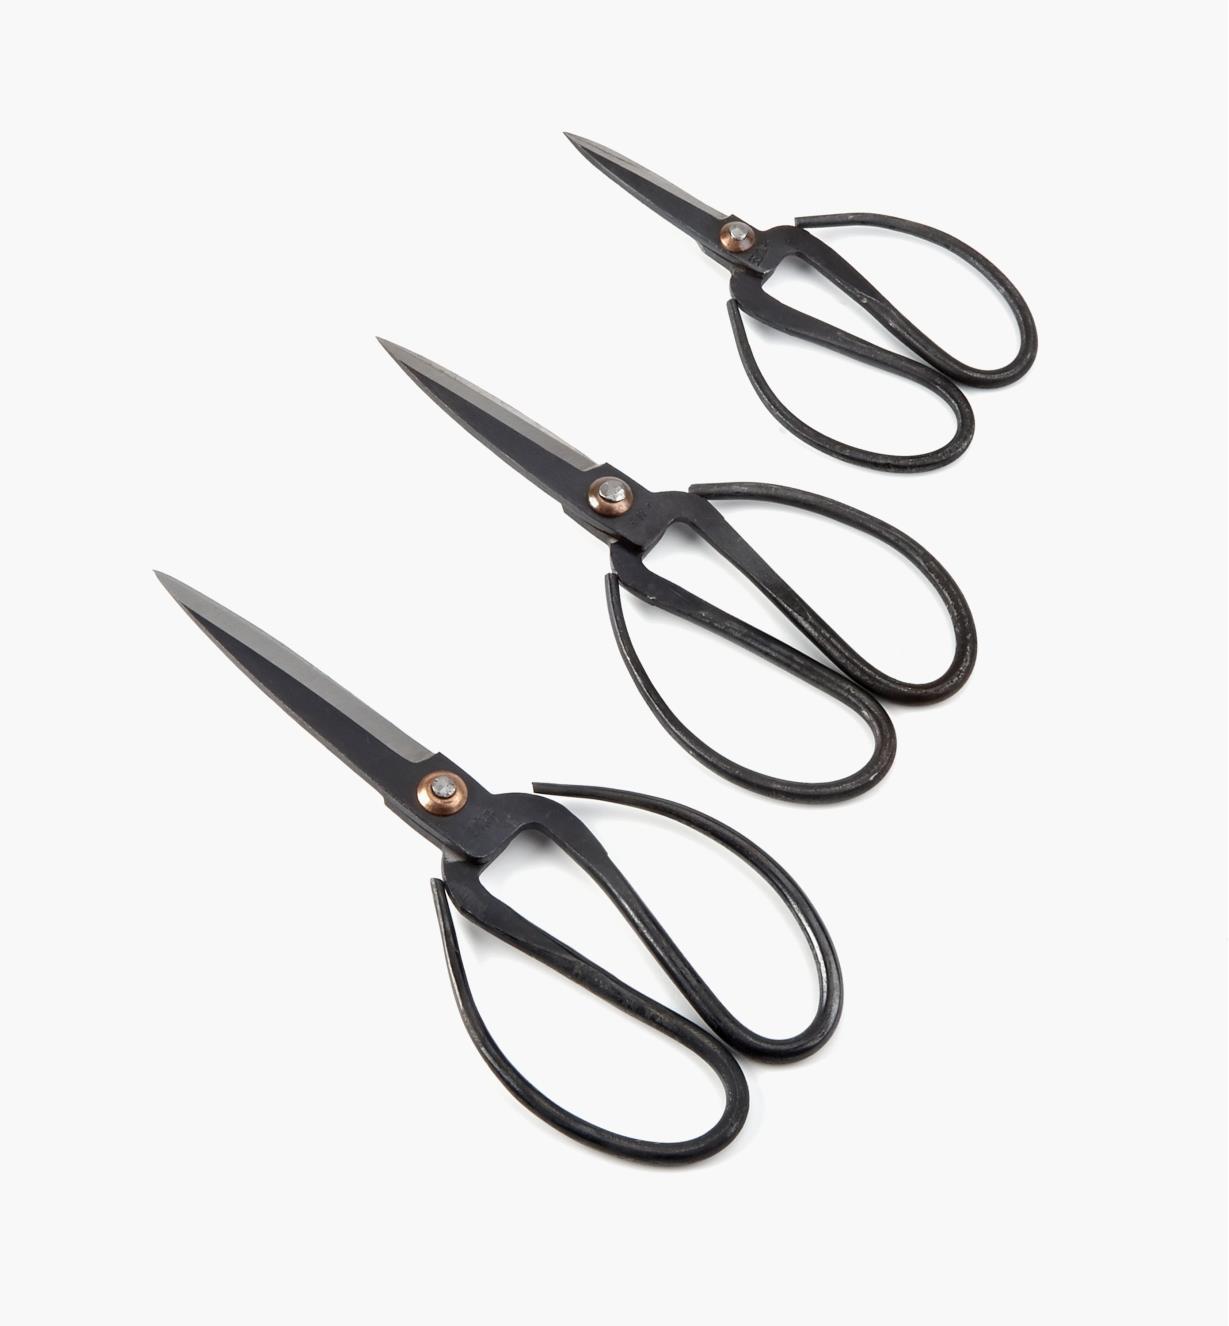 45K1012 - Set of 3 Traditional Chinese Scissors